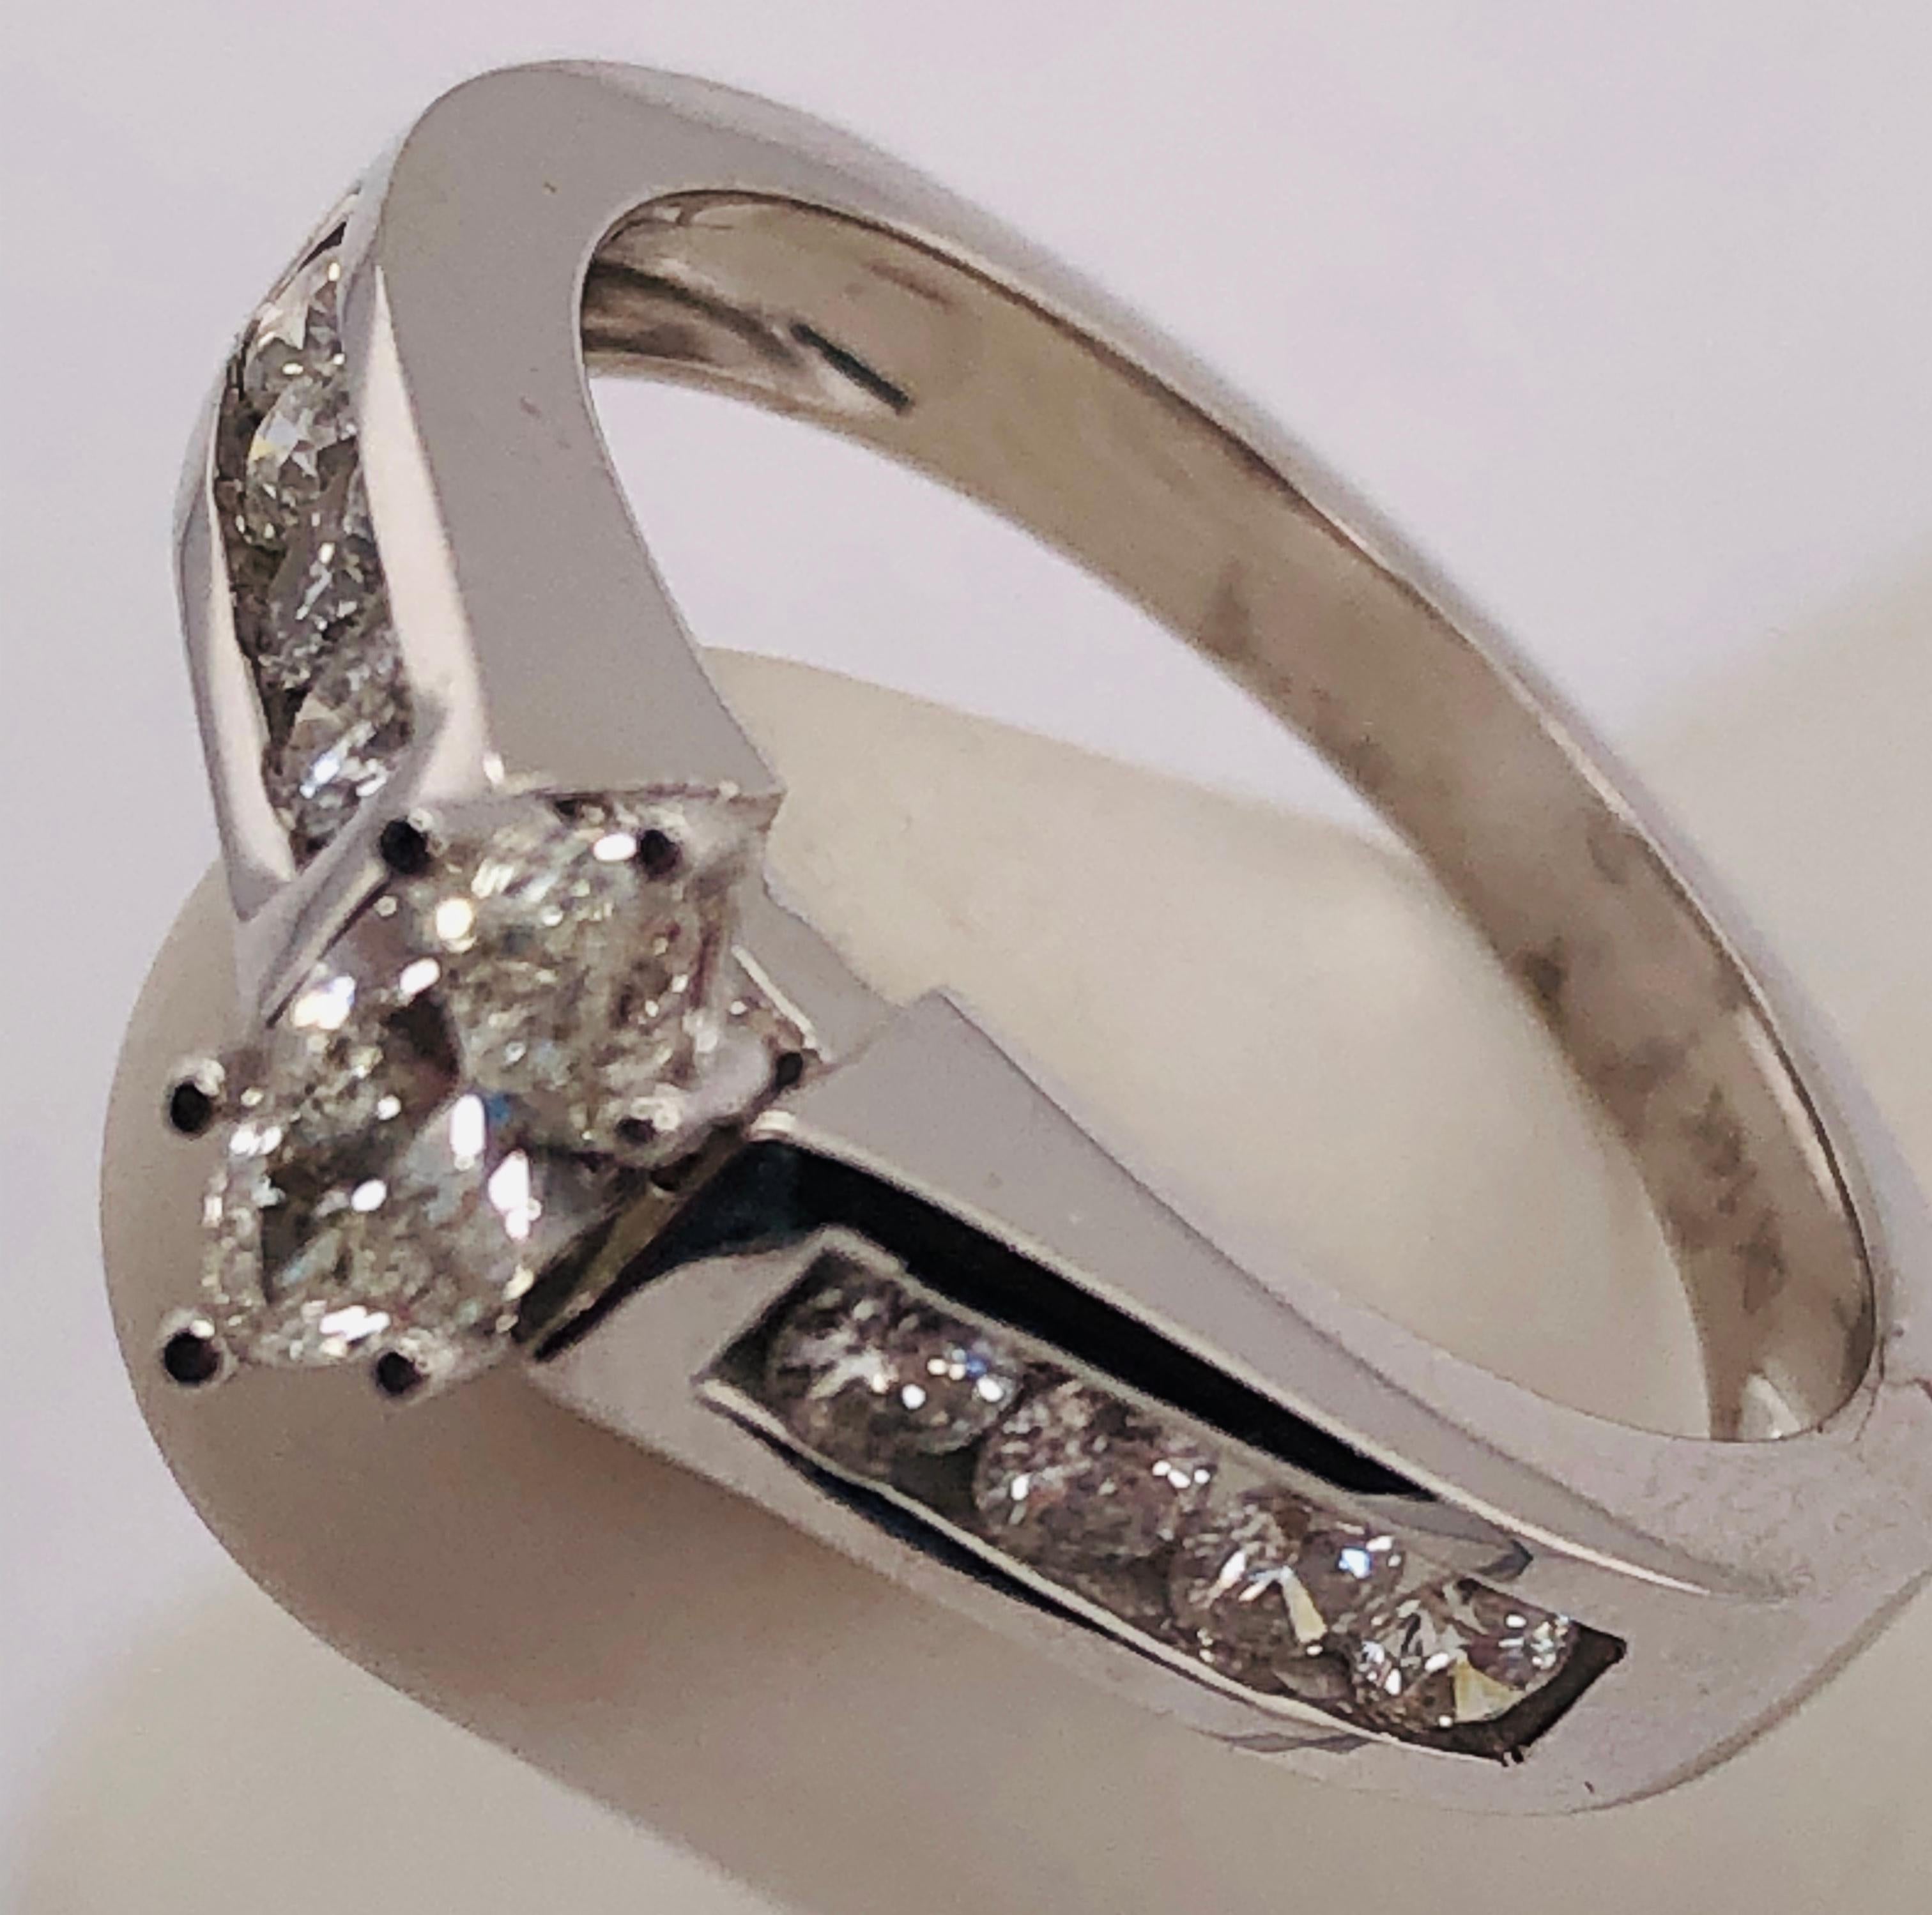 14Kt White Gold Diamond Engagement Bridal Ring 
1.20 Total Diamond Weight
Size 6.75 
4 grams total weight